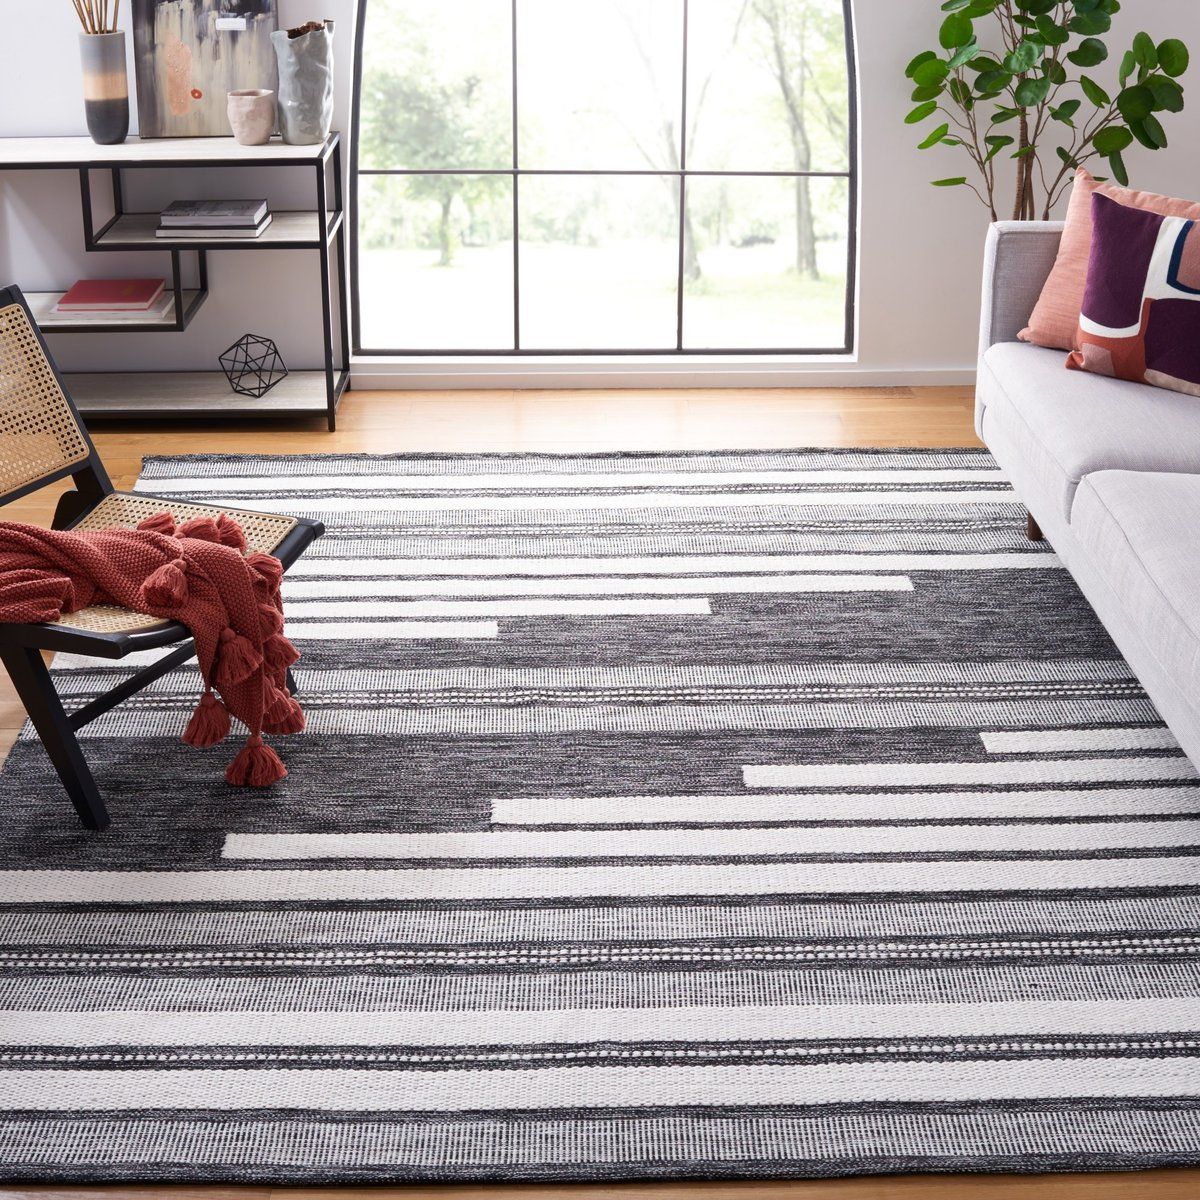 Safavieh Kilim Klm 448 Bohemian Area Rugs | Rugs Direct Throughout Ivory Black Rugs (View 12 of 15)